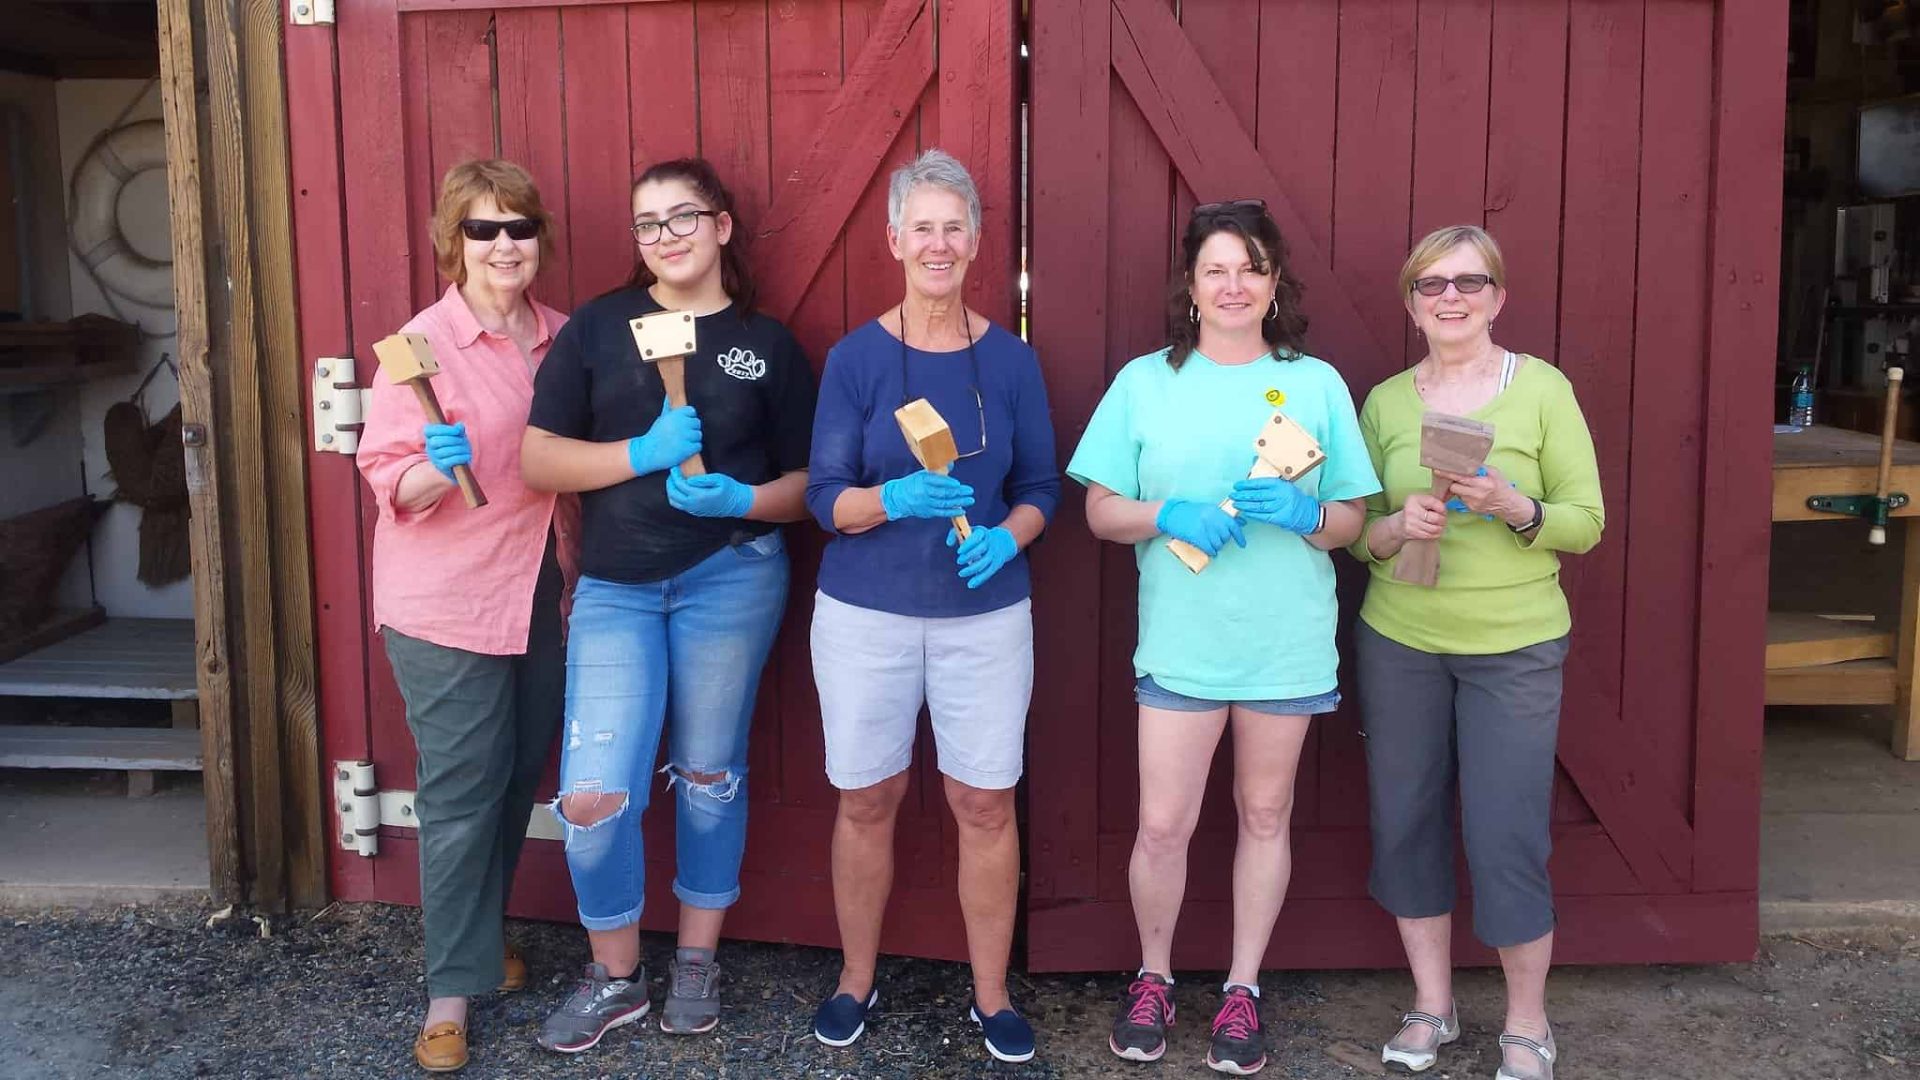 CBMM will host a two-day introductory Women’s Woodworking Workshop in March before following up with a four-day intermediate course in July.